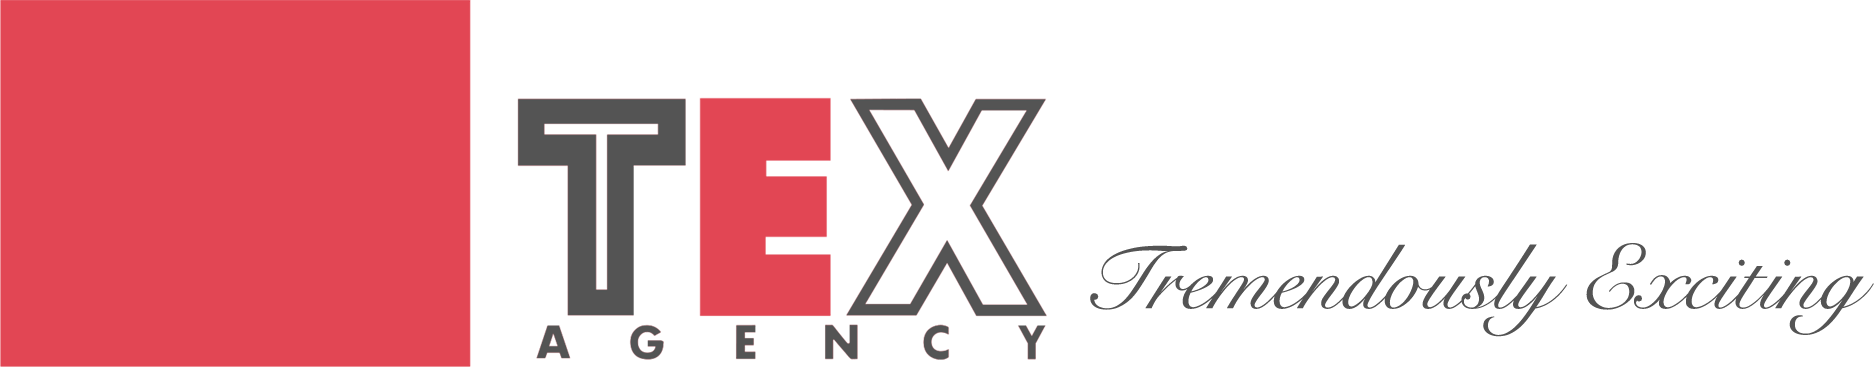 TEX AGENCY tremendously exciting